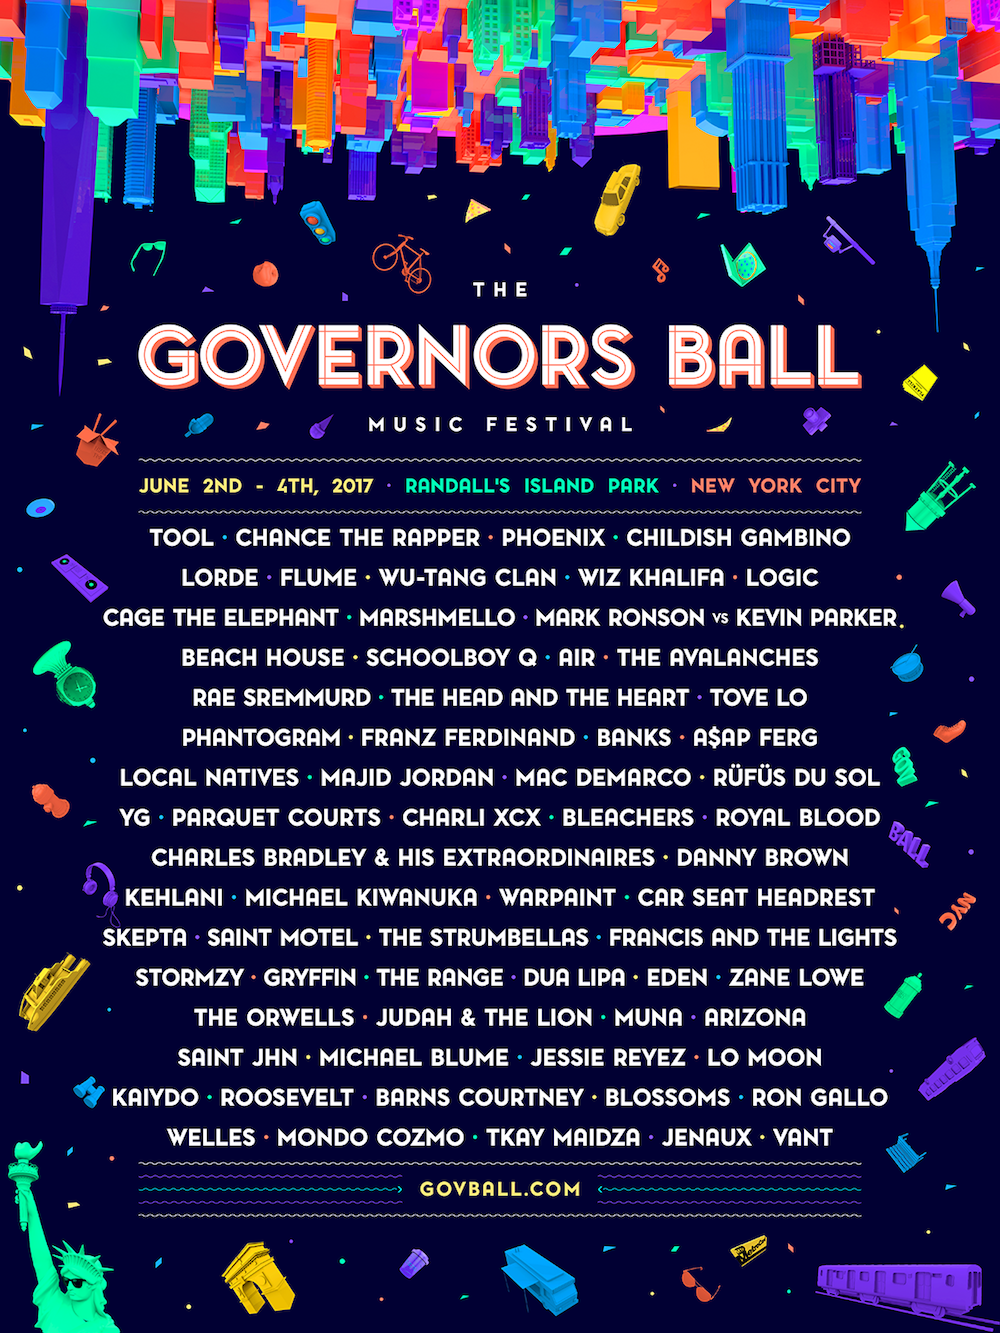 Governors Ball 2017 Lineup Features Tool, Chance the Rapper, and Phoenix